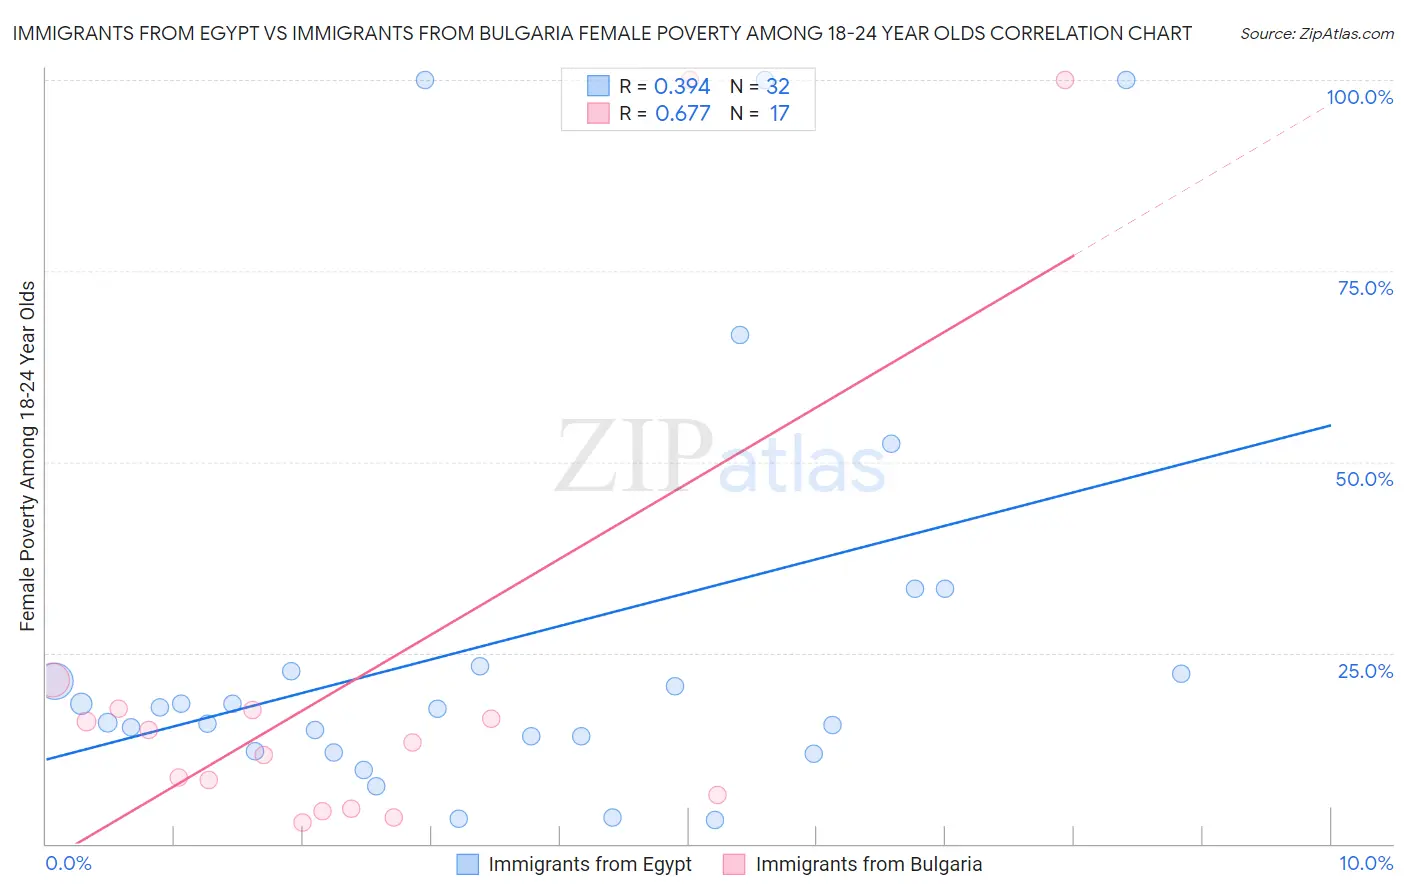 Immigrants from Egypt vs Immigrants from Bulgaria Female Poverty Among 18-24 Year Olds